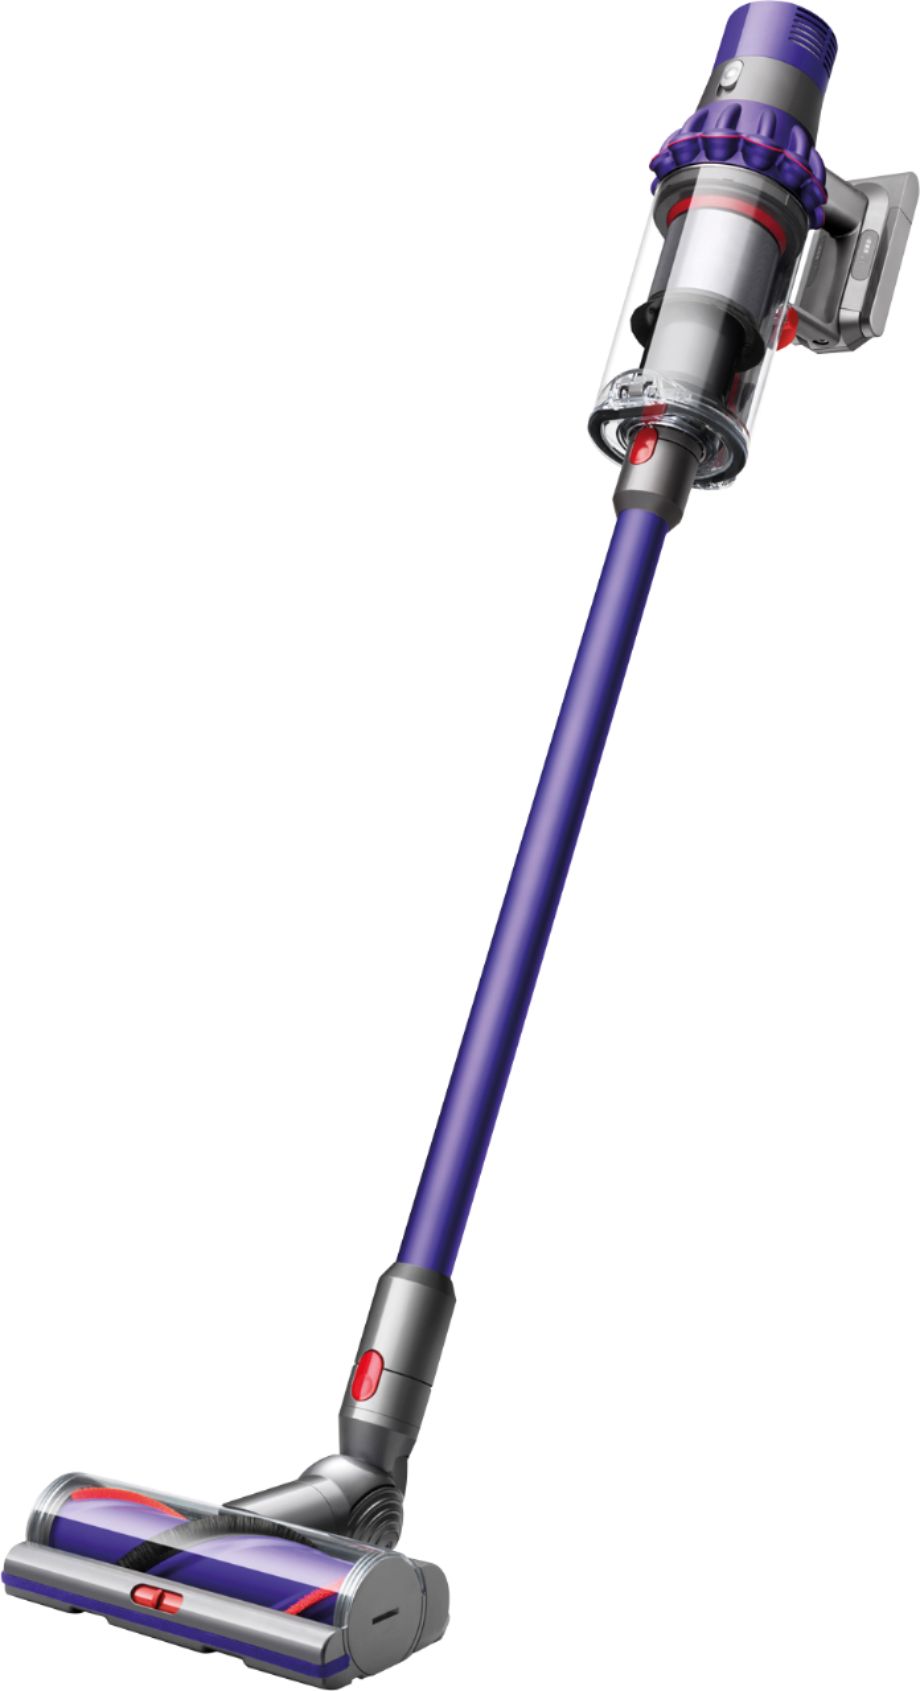 Questions and Answers: Dyson Cyclone V10 Animal Cord-Free Stick 